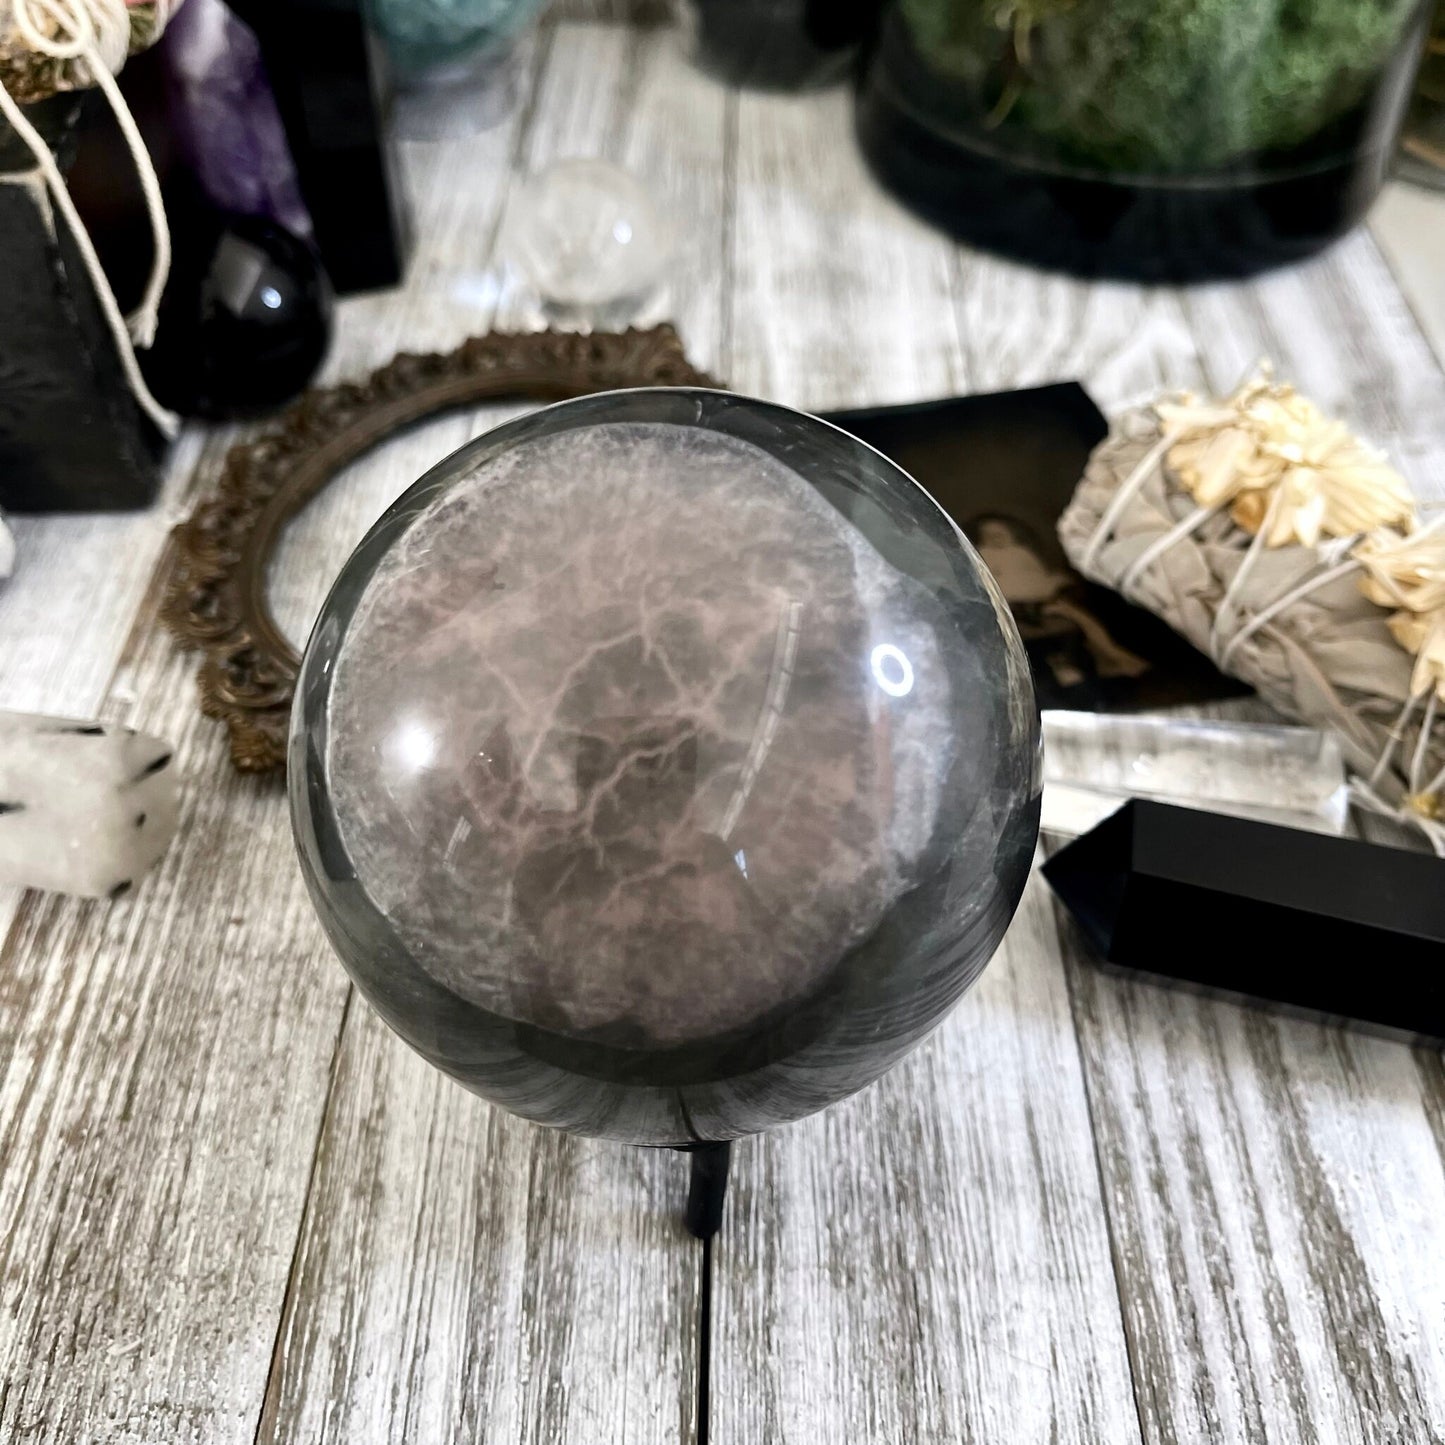 Purple and Green Fluorite Crystal Ball / FoxlarkCrystals / Crystal Sphere Wiccan Pagan Spells Rituals Magic Scrying Orb Metaphysical